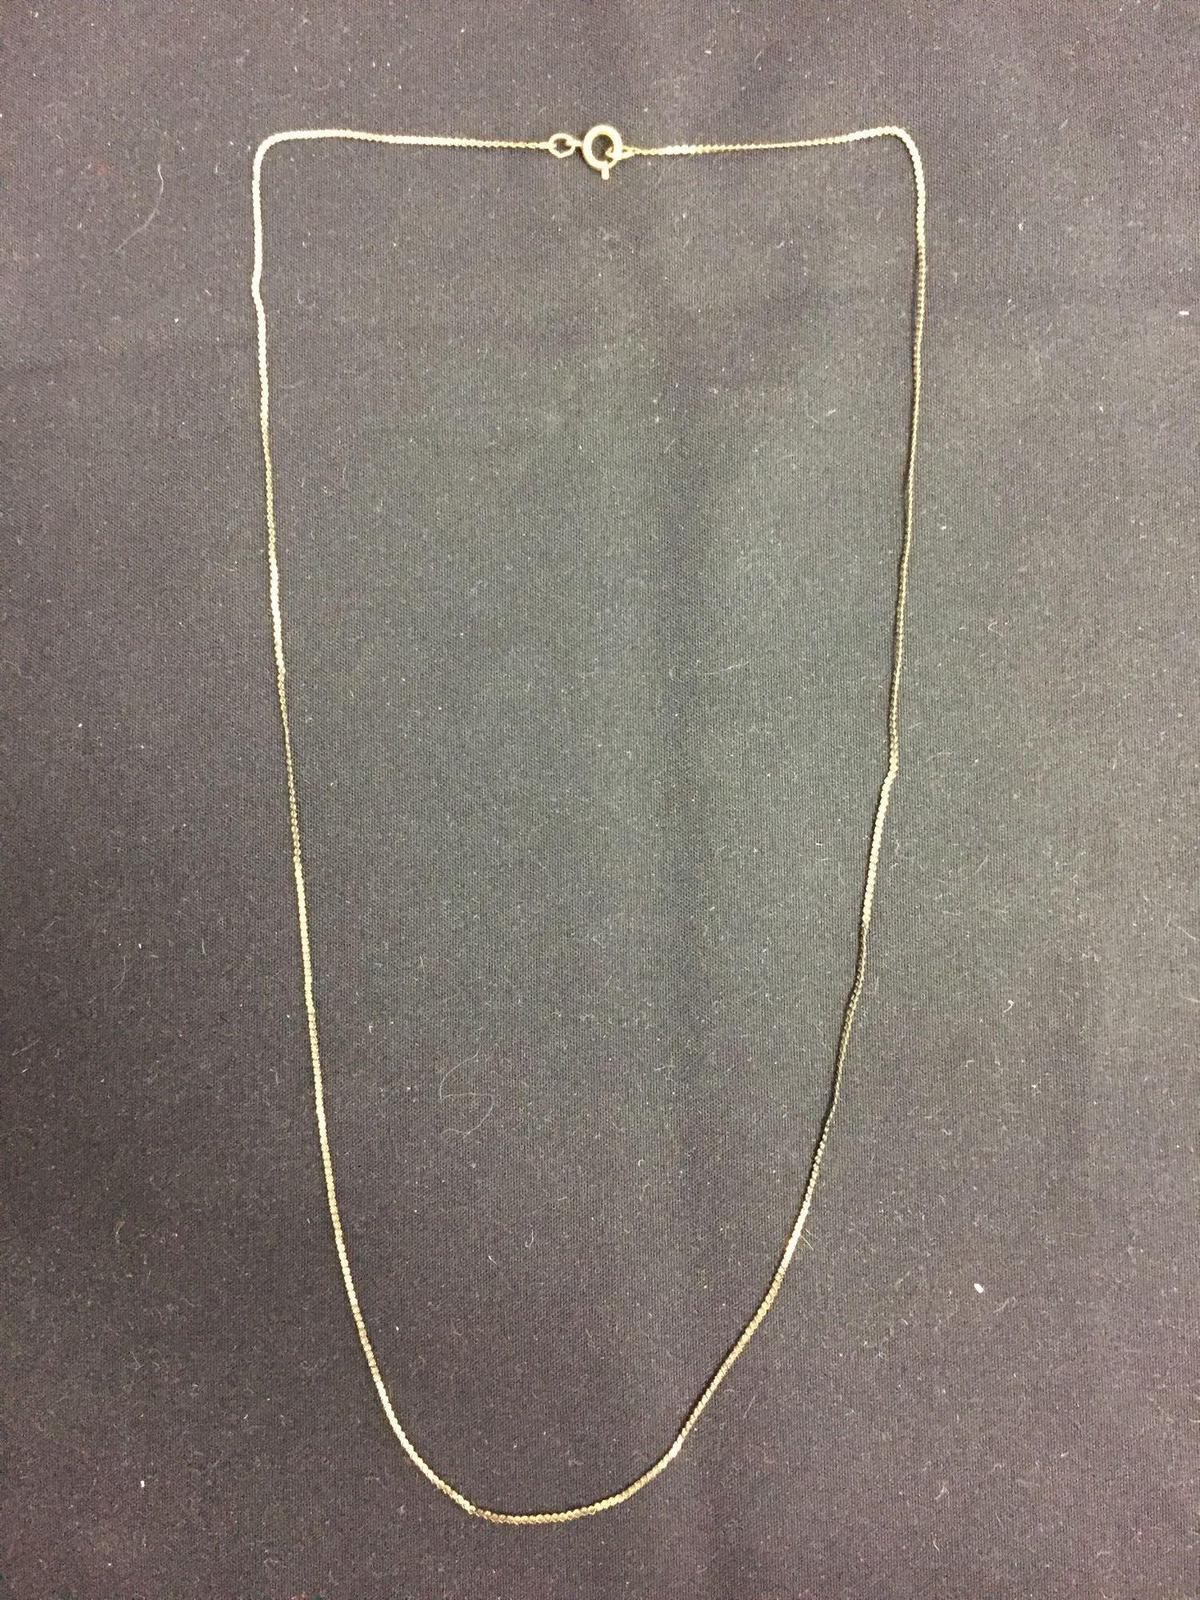 Serpentine Link 0.75mm Wide 18in Long 14kT Gold Filled Chain